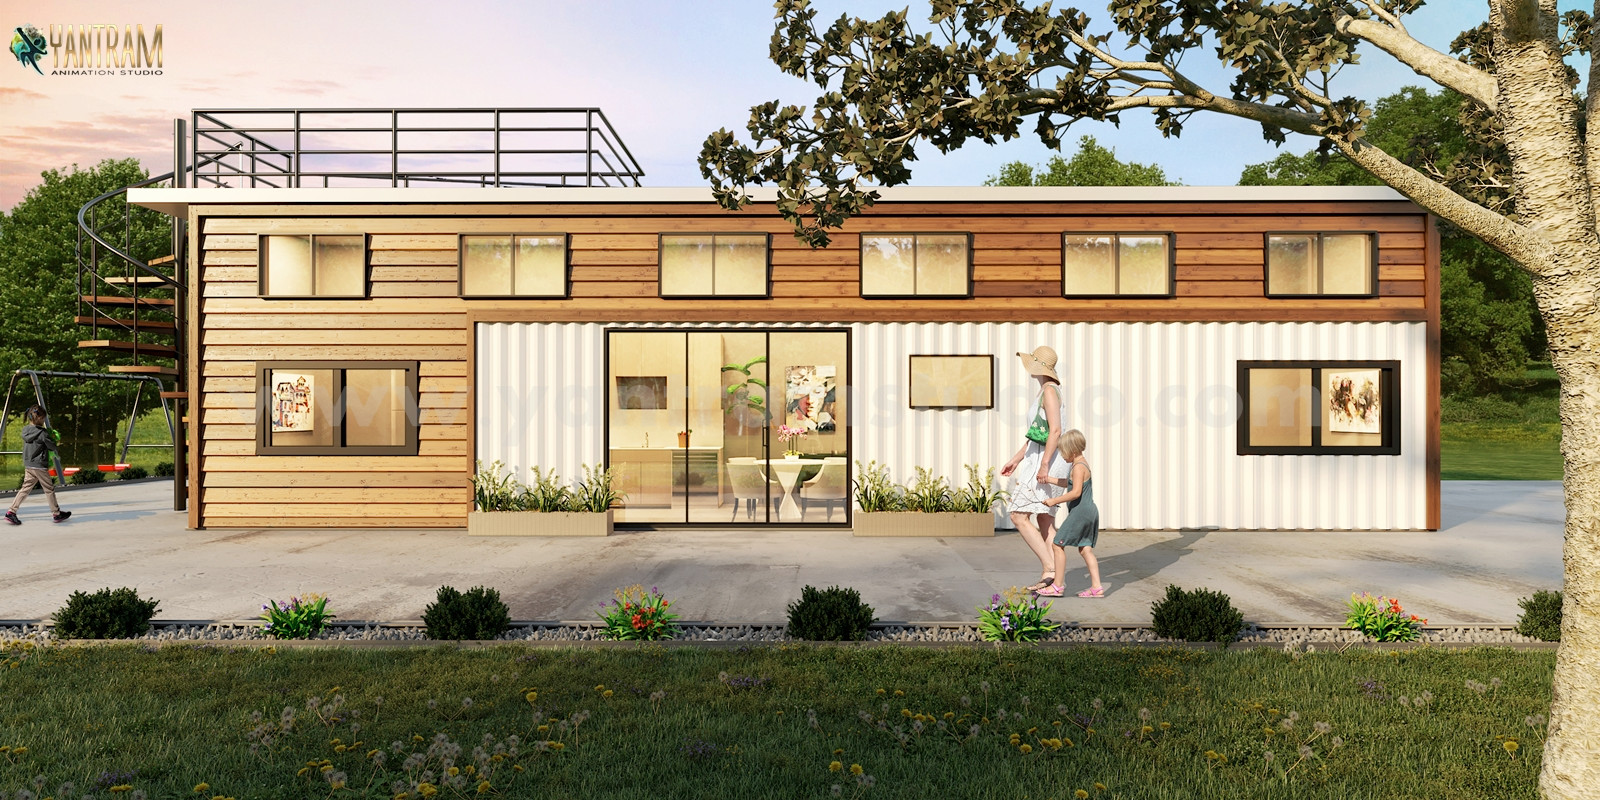 Popular Shipping Container House architectural rendering studio, Amsterdam  - Exterior - Amsterdam - by Yantram Animation Studio - Rendering Studio |  Houzz